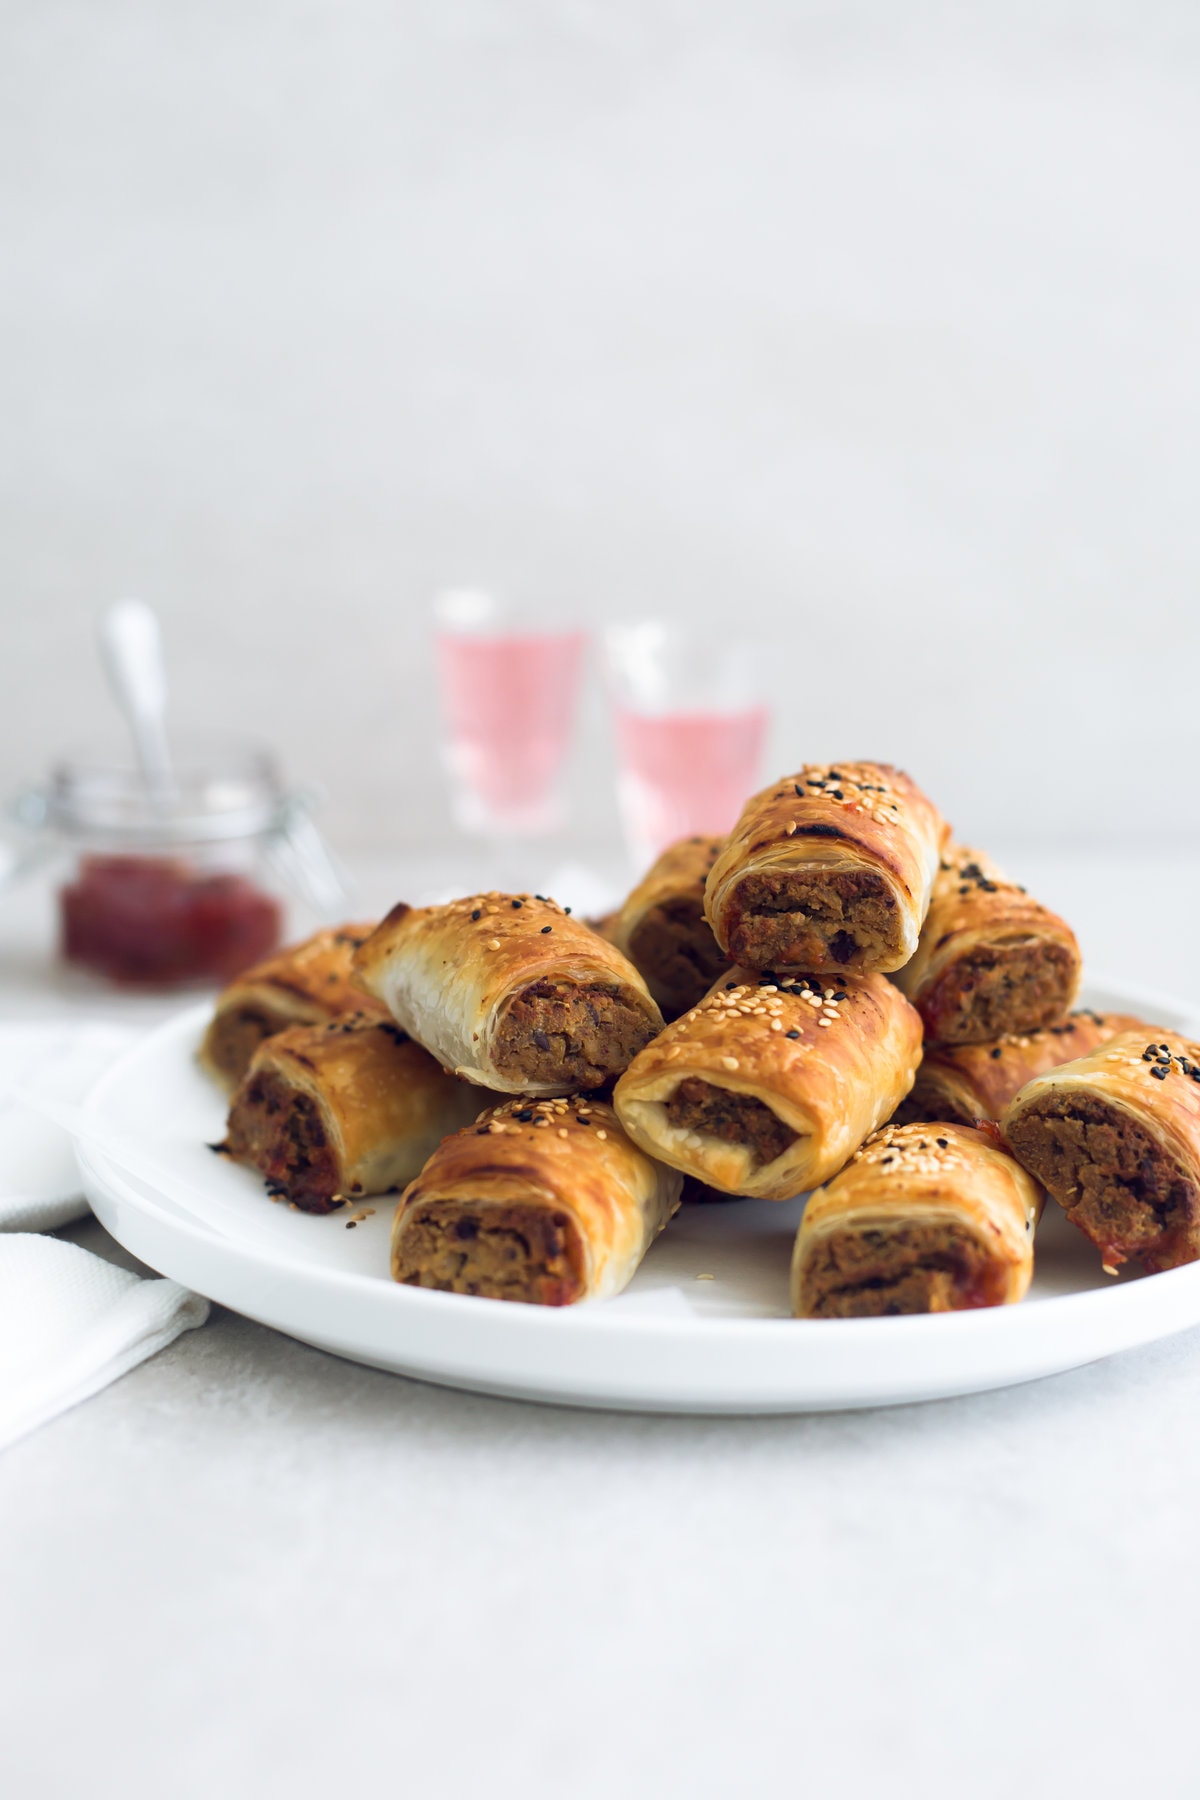 Delicious Vegan Tofu Sausage Rolls - Tofu and Nut Sausage Mince encased in golden and flaky Puff Pastry, served with Tomato Sauce. Perfect for parties and picnics. #vegan #tofu #sausagerolls #vegansausagerolls #simple #delicious #puffpastry #nuts 